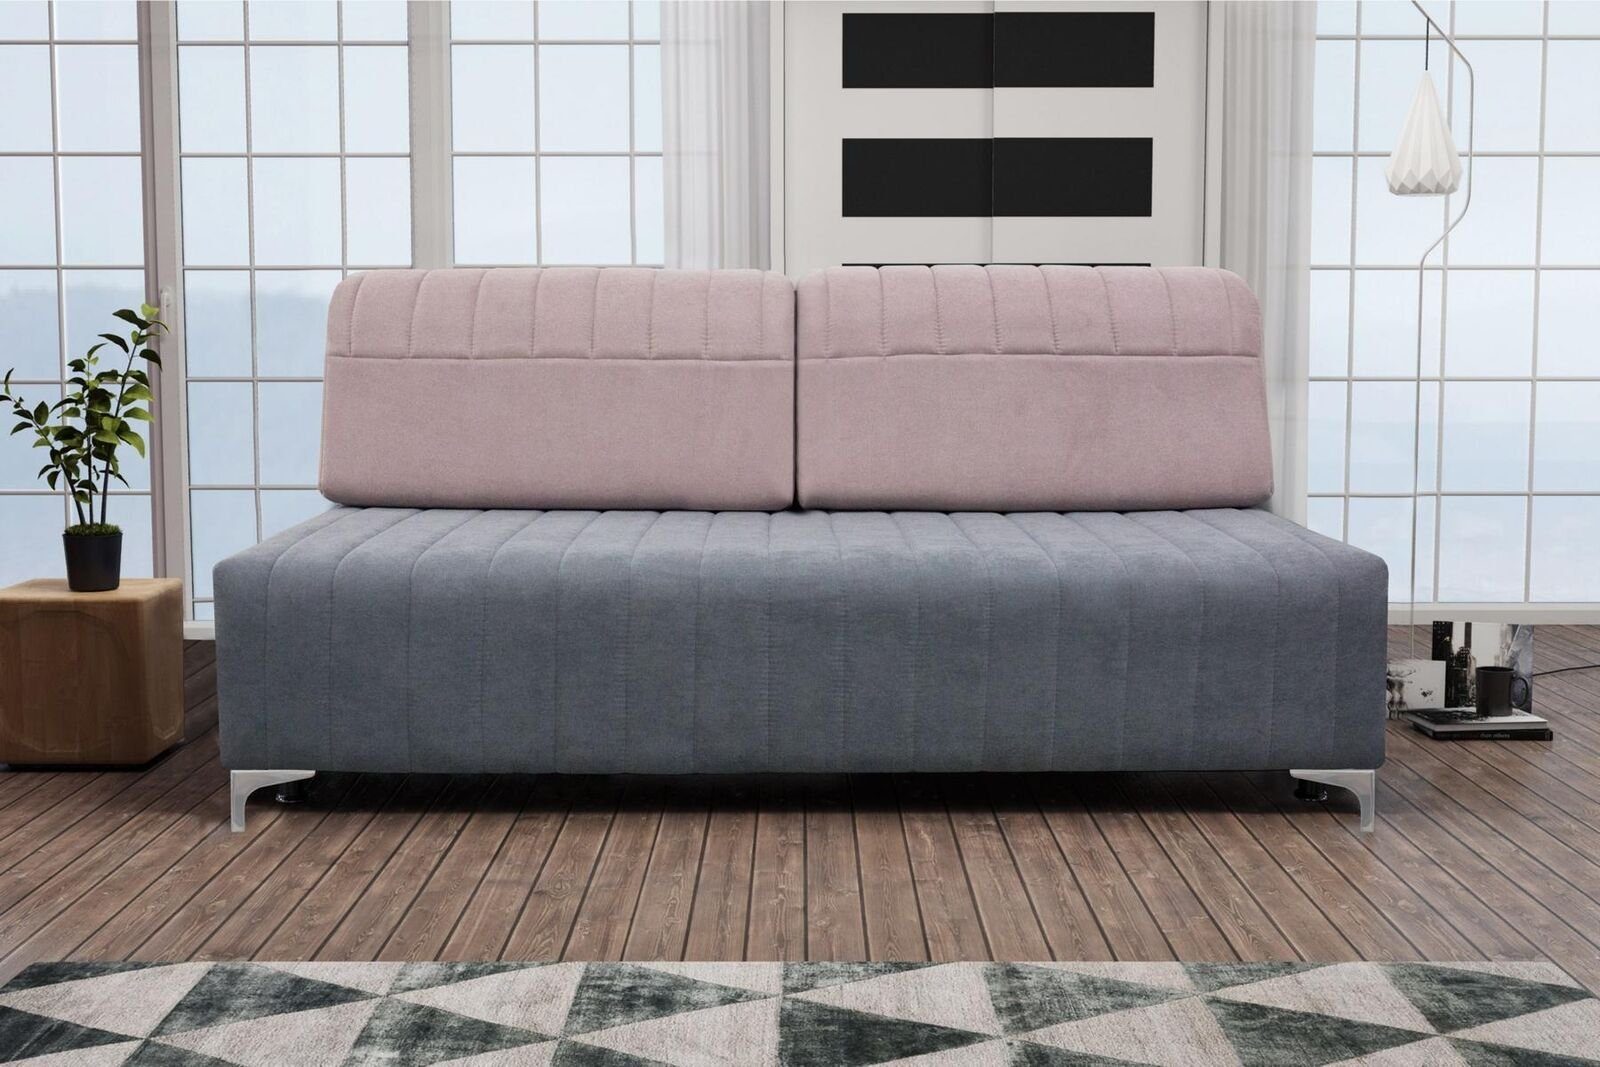 JVmoebel Sofa 2 Lounge Sofa in Sofa, Sitzer Made Polster Design Europe Stoff Couch